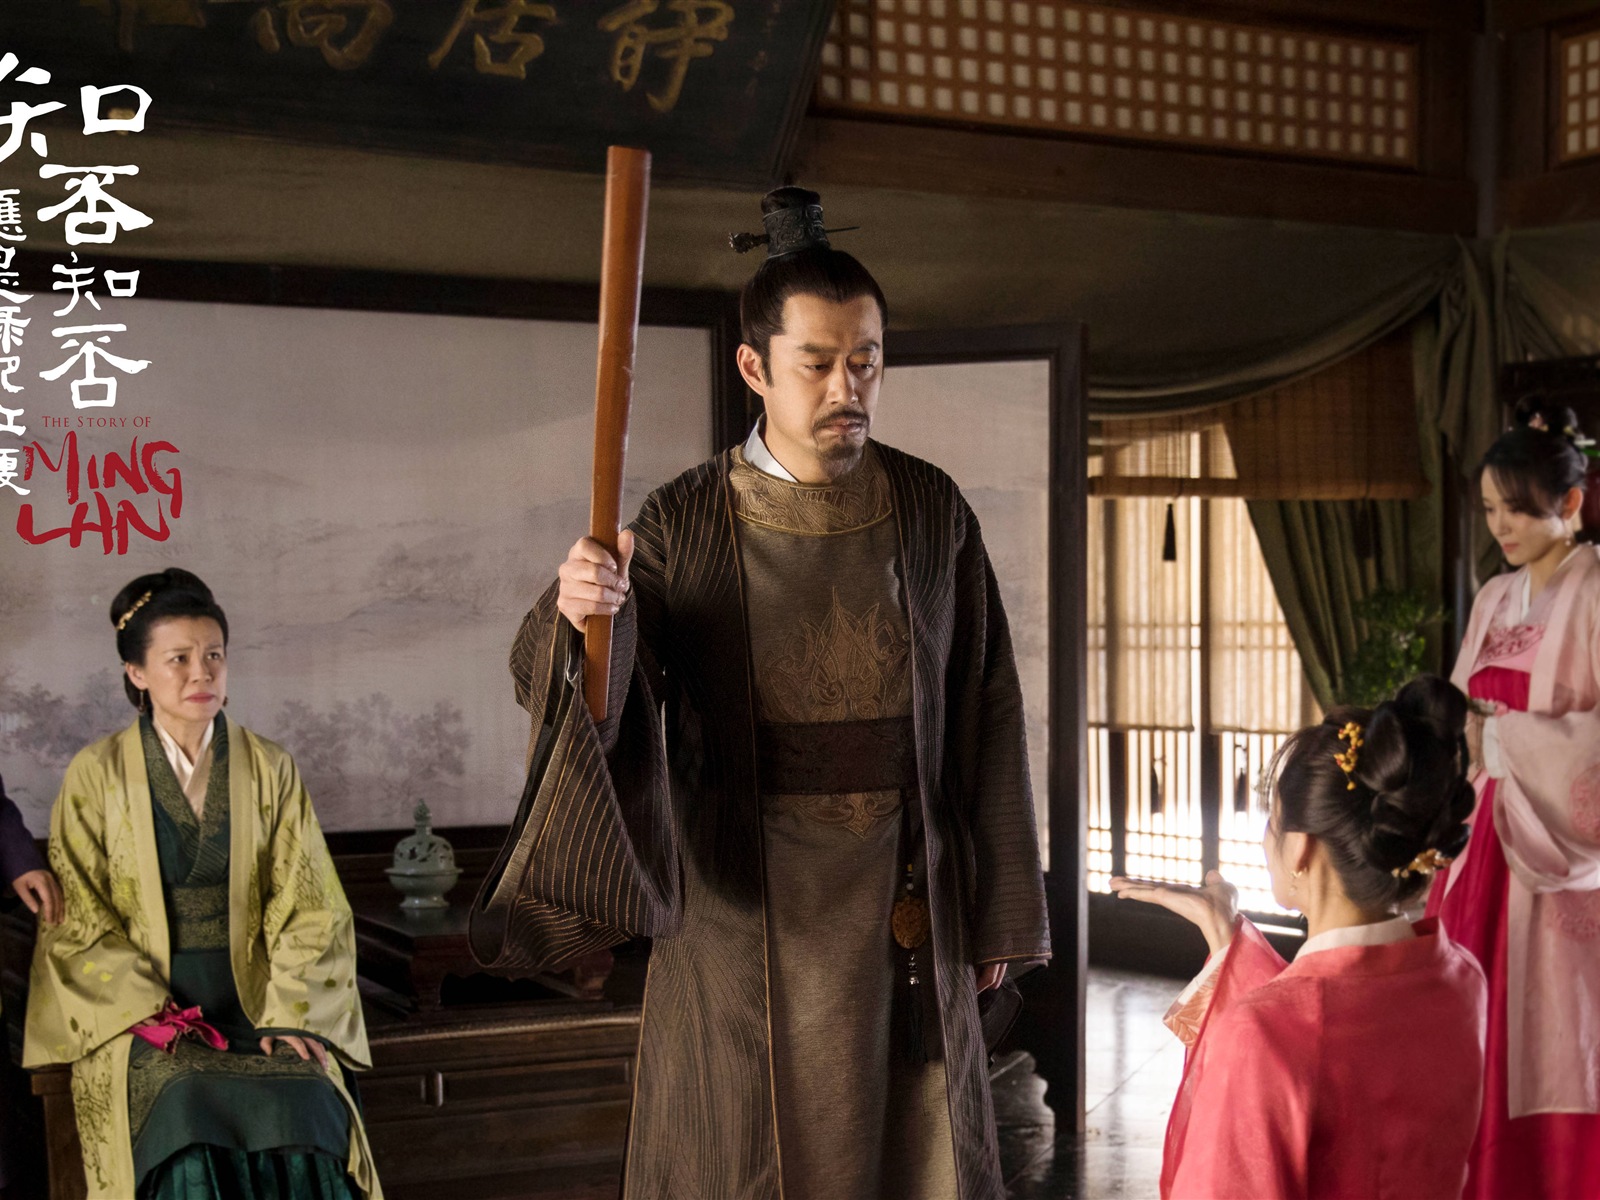 The Story Of MingLan, TV series HD wallpapers #47 - 1600x1200